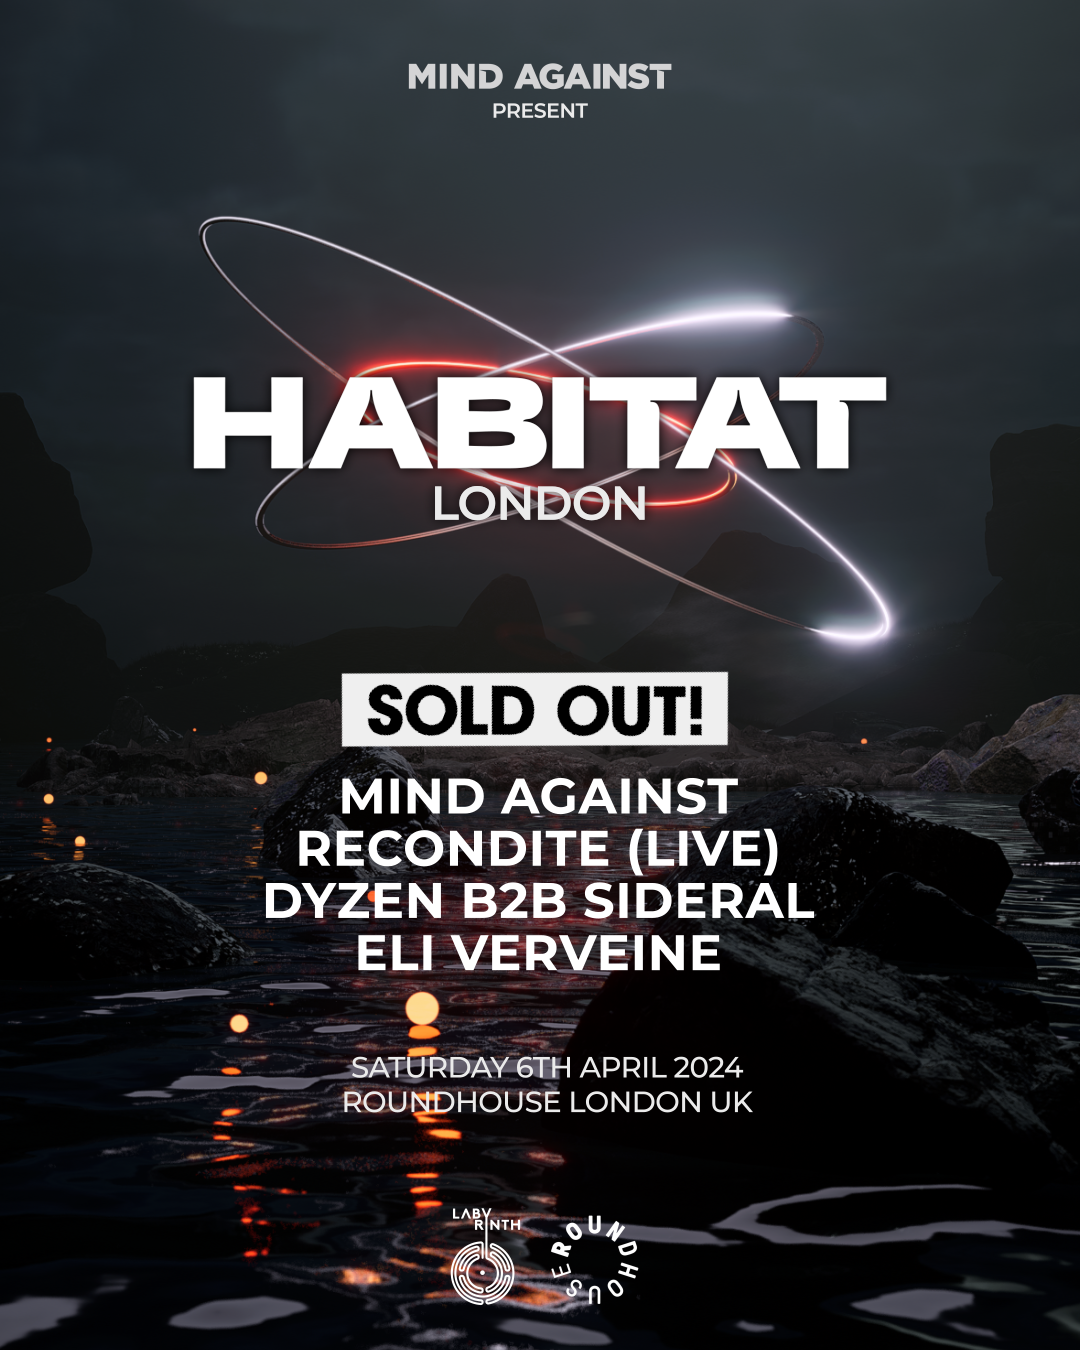 SOLD OUT: Mind Against present HABITAT London - フライヤー表